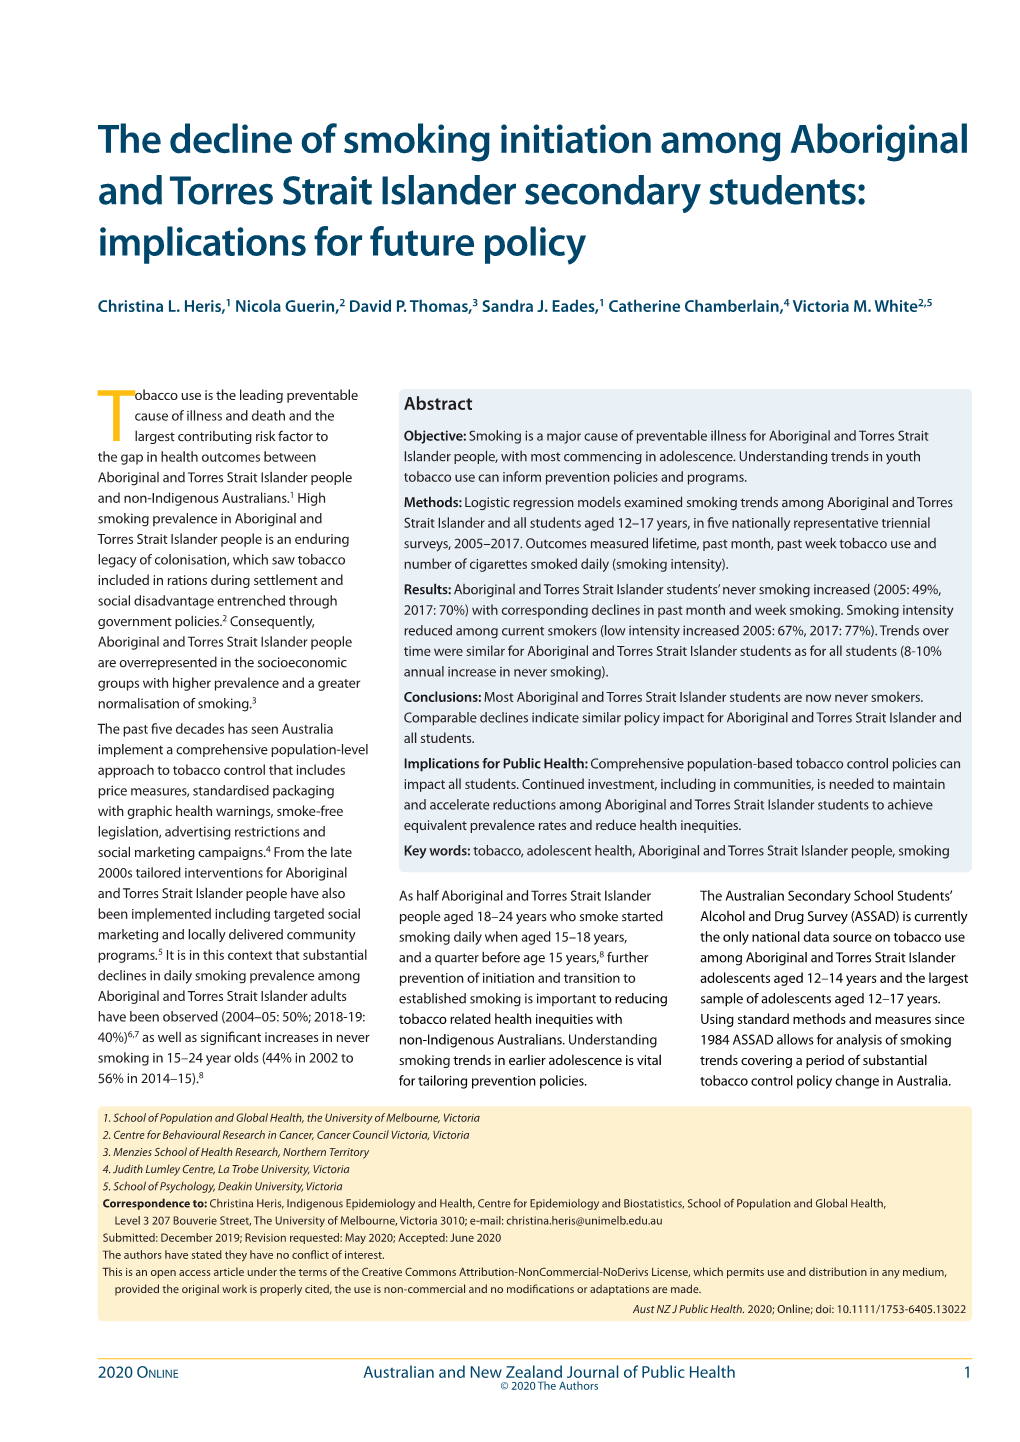 The Decline of Smoking Initiation Among Aboriginal and Torres Strait Islander Secondary Students: Implications for Future Policy